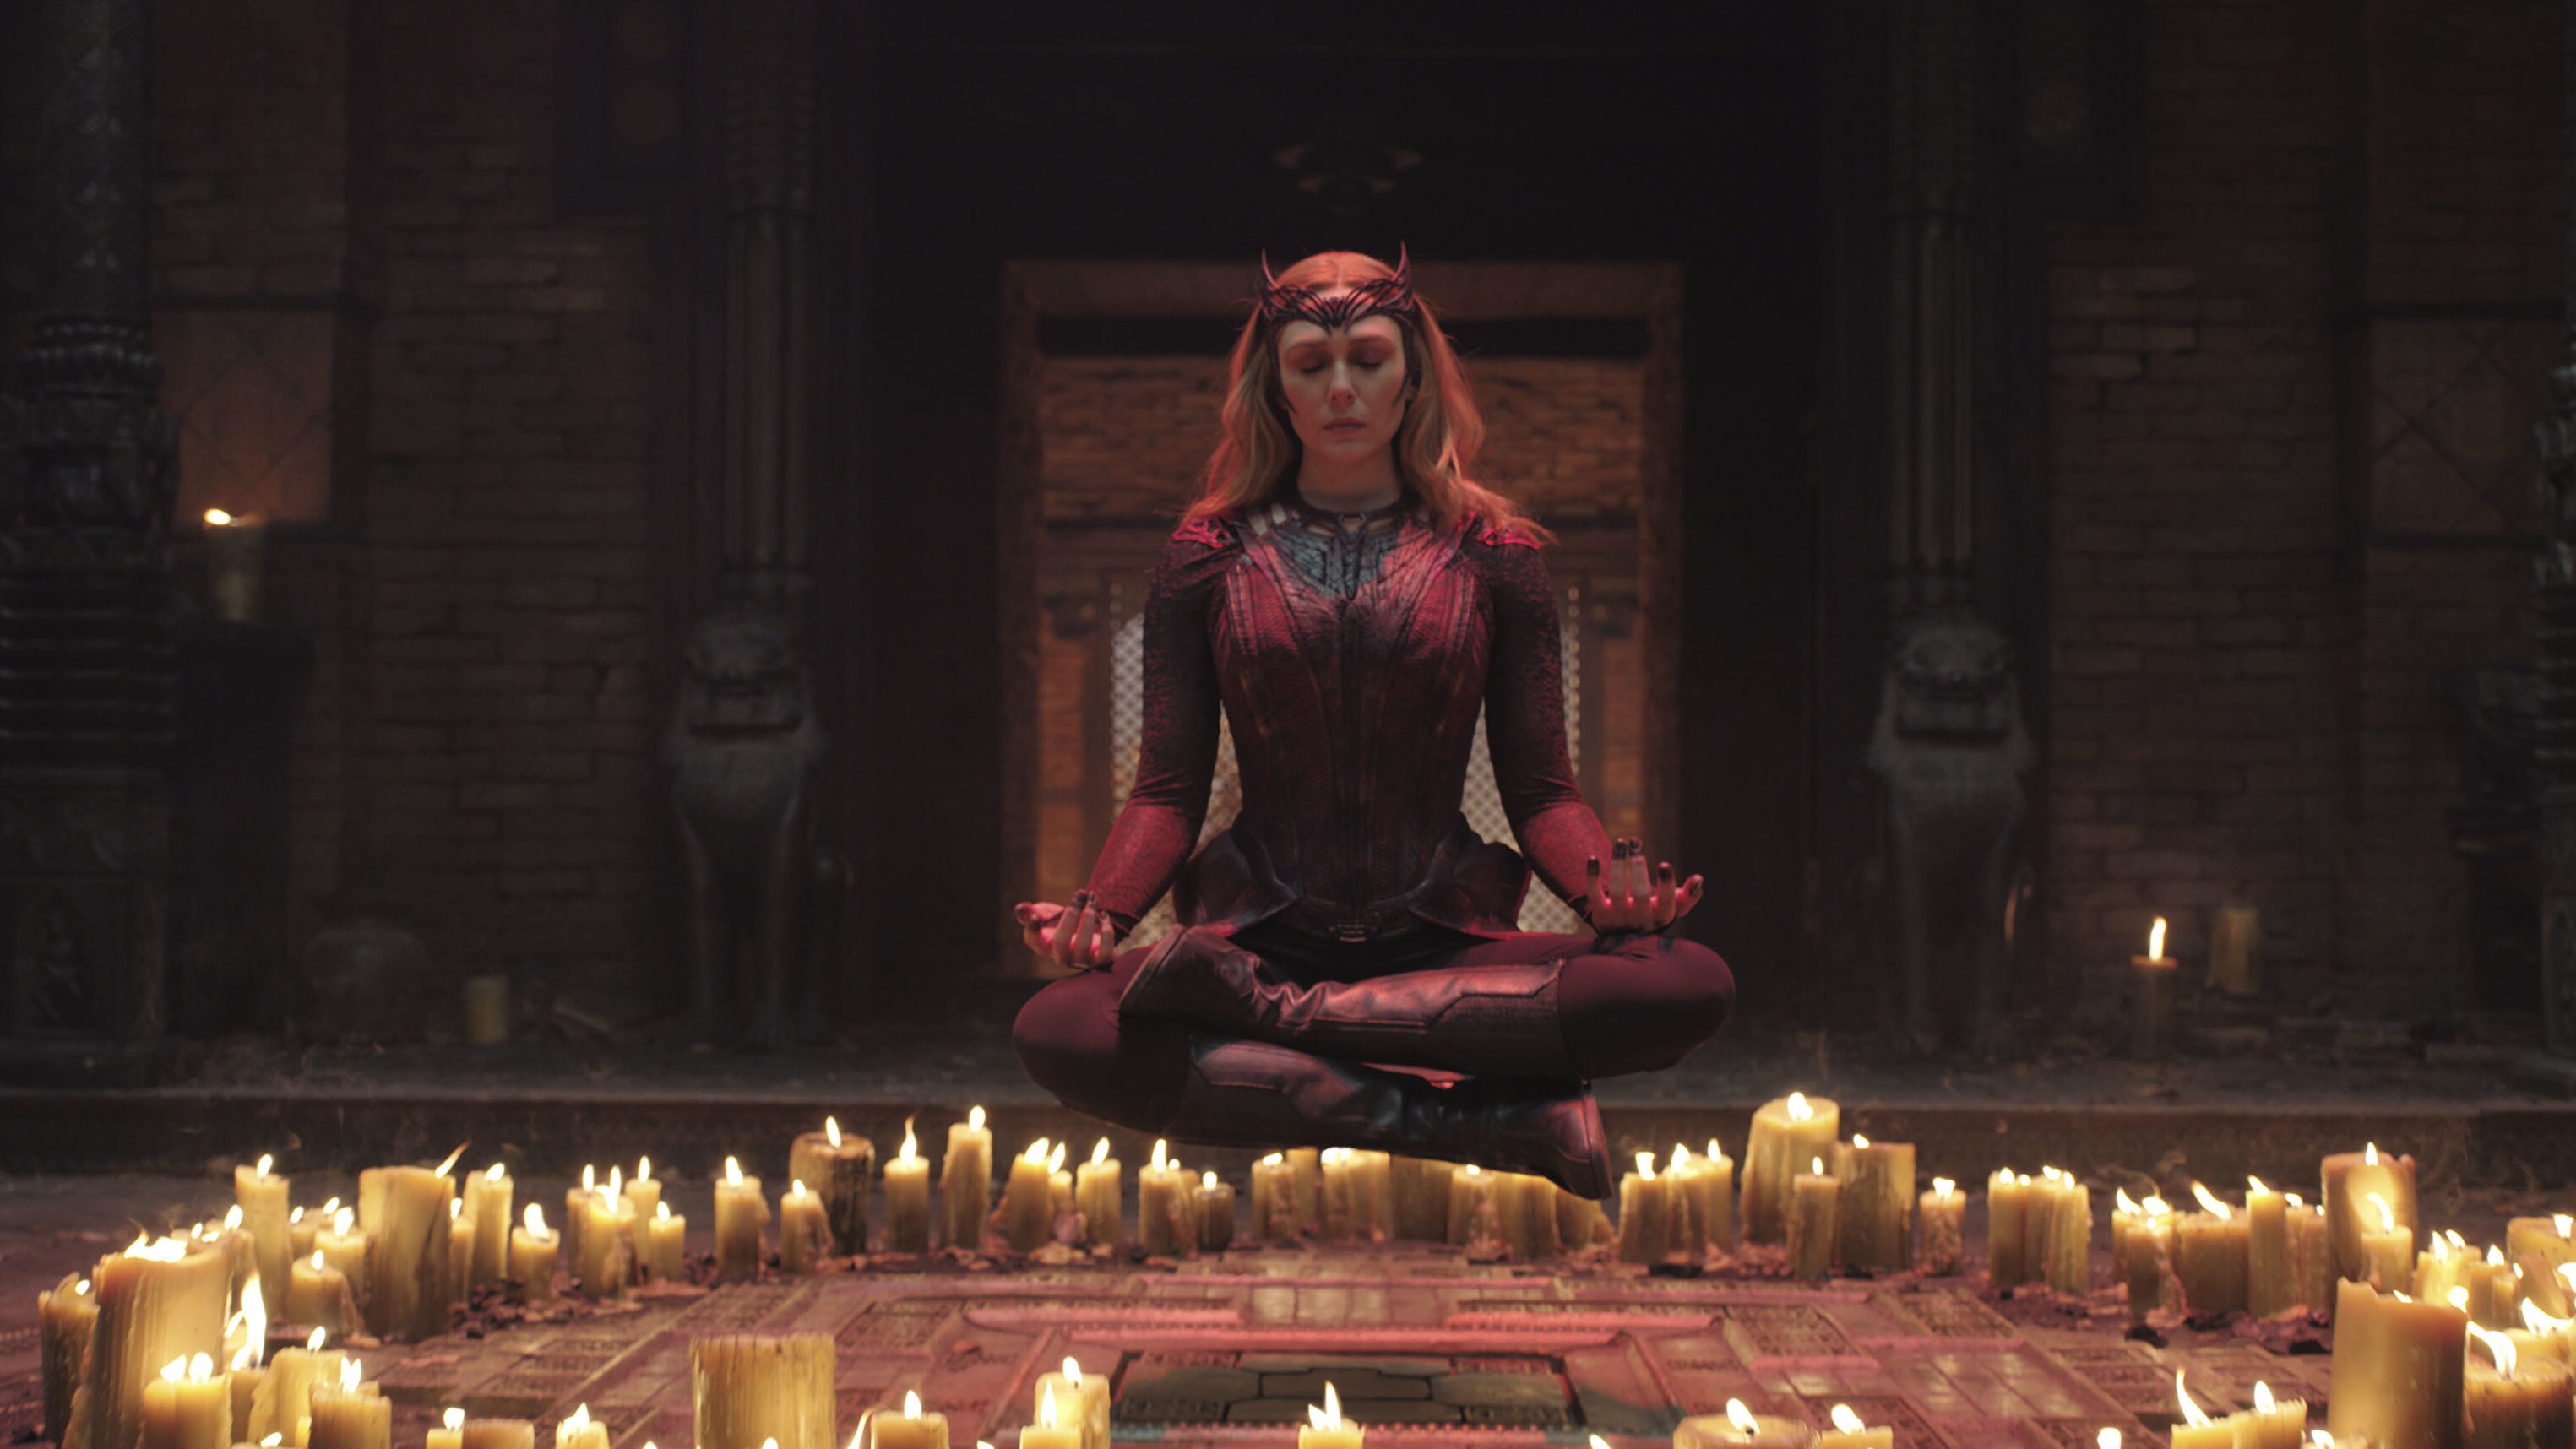 Wanda aka the scarlet witch using her magic surrounded by candles 